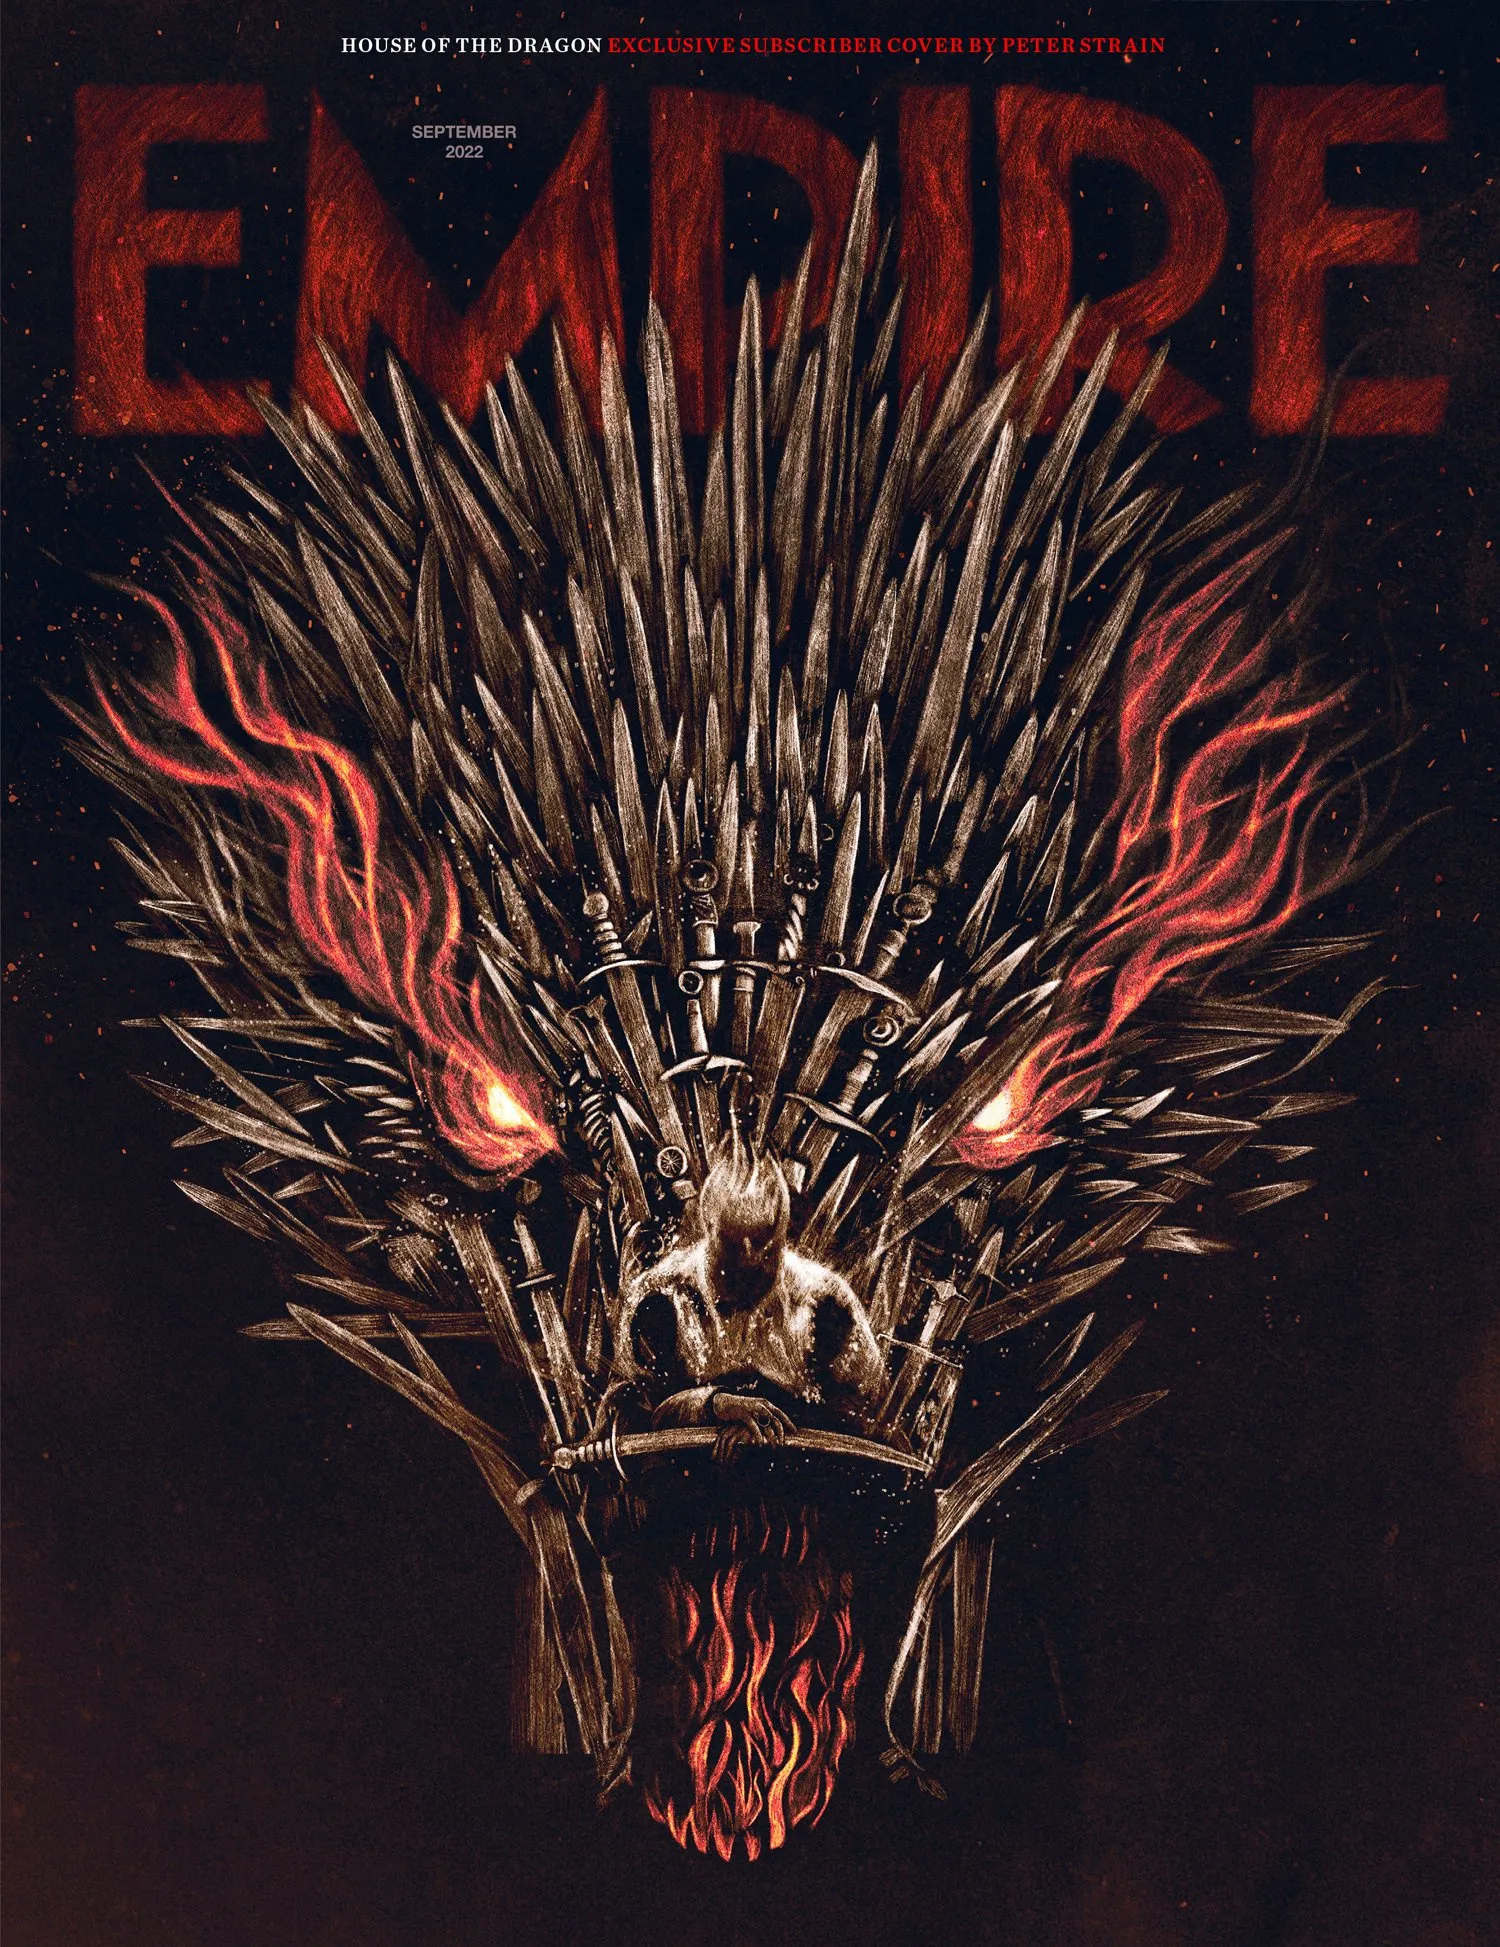 'House of the Dragon' on the cover of 'Empire' September issue | FMV6